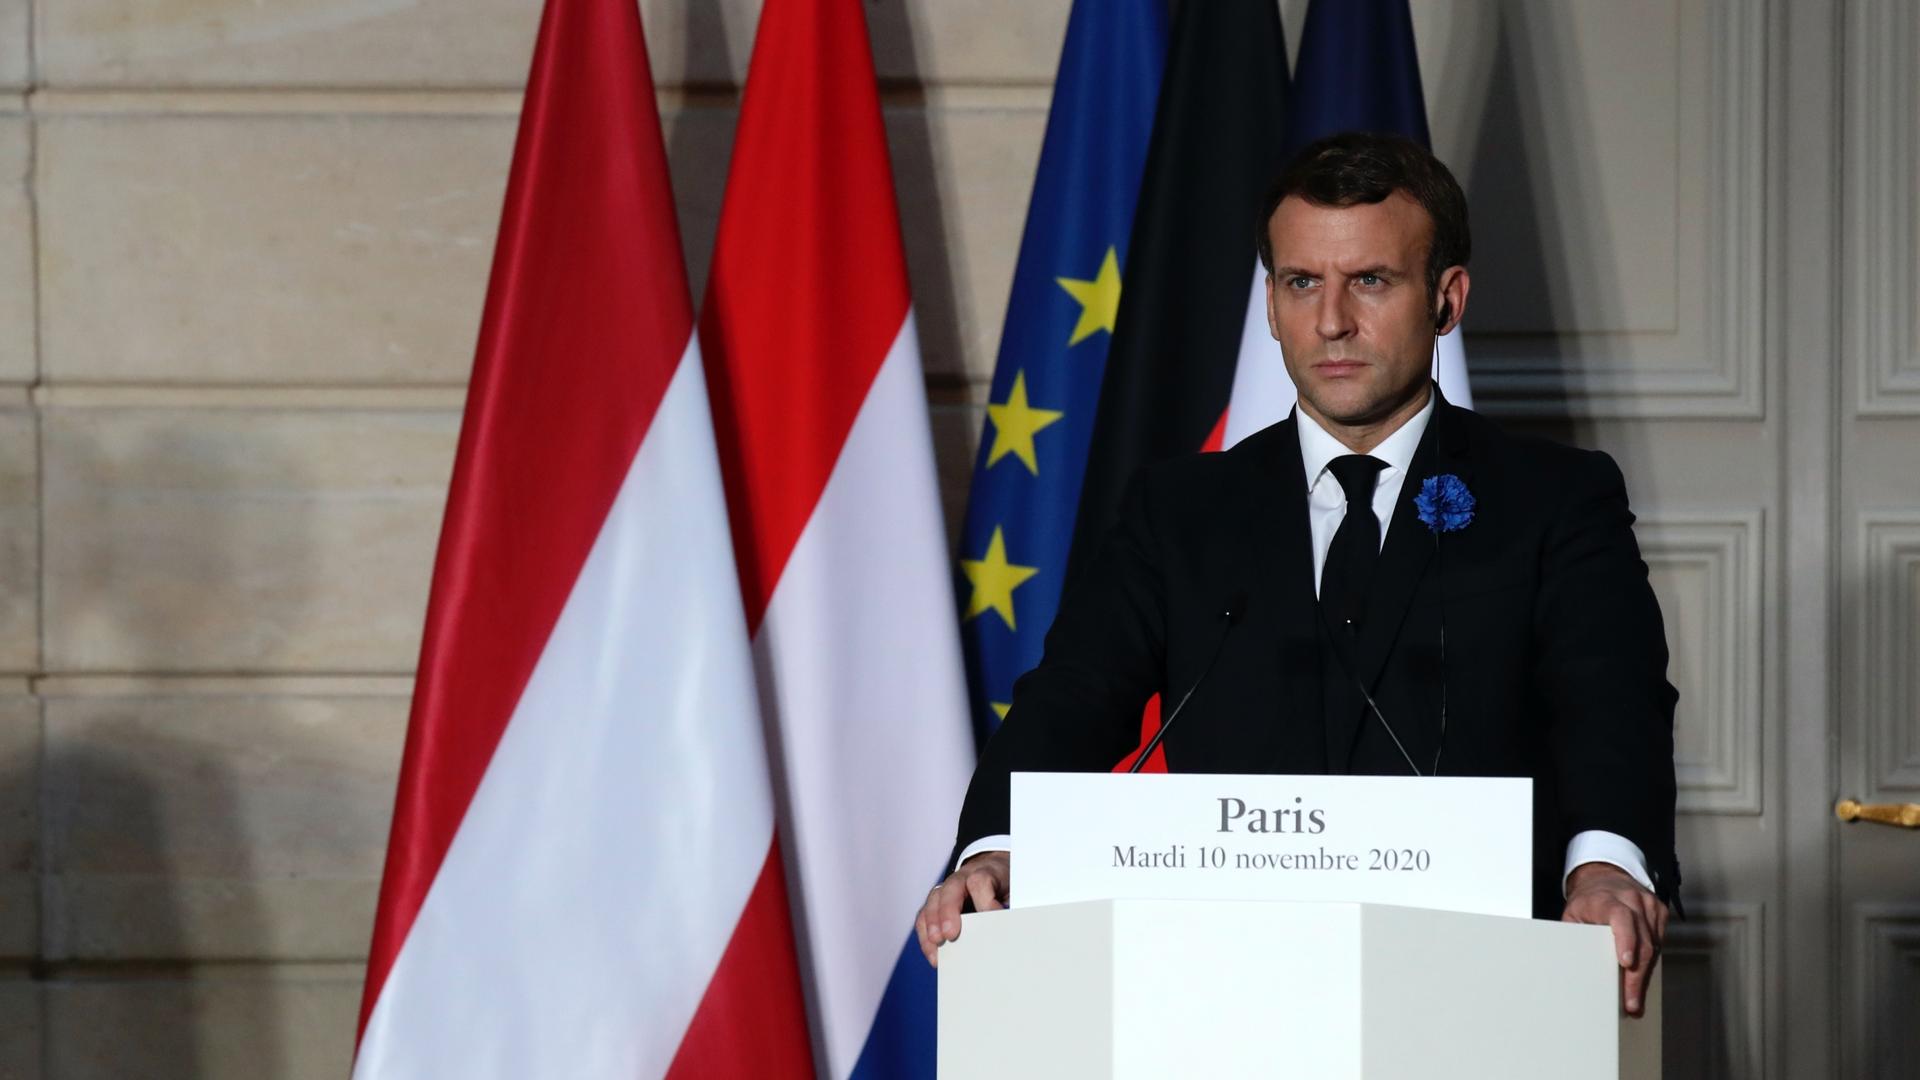 French President Emmanuel Macron stands at a podium with French flag behind him. 